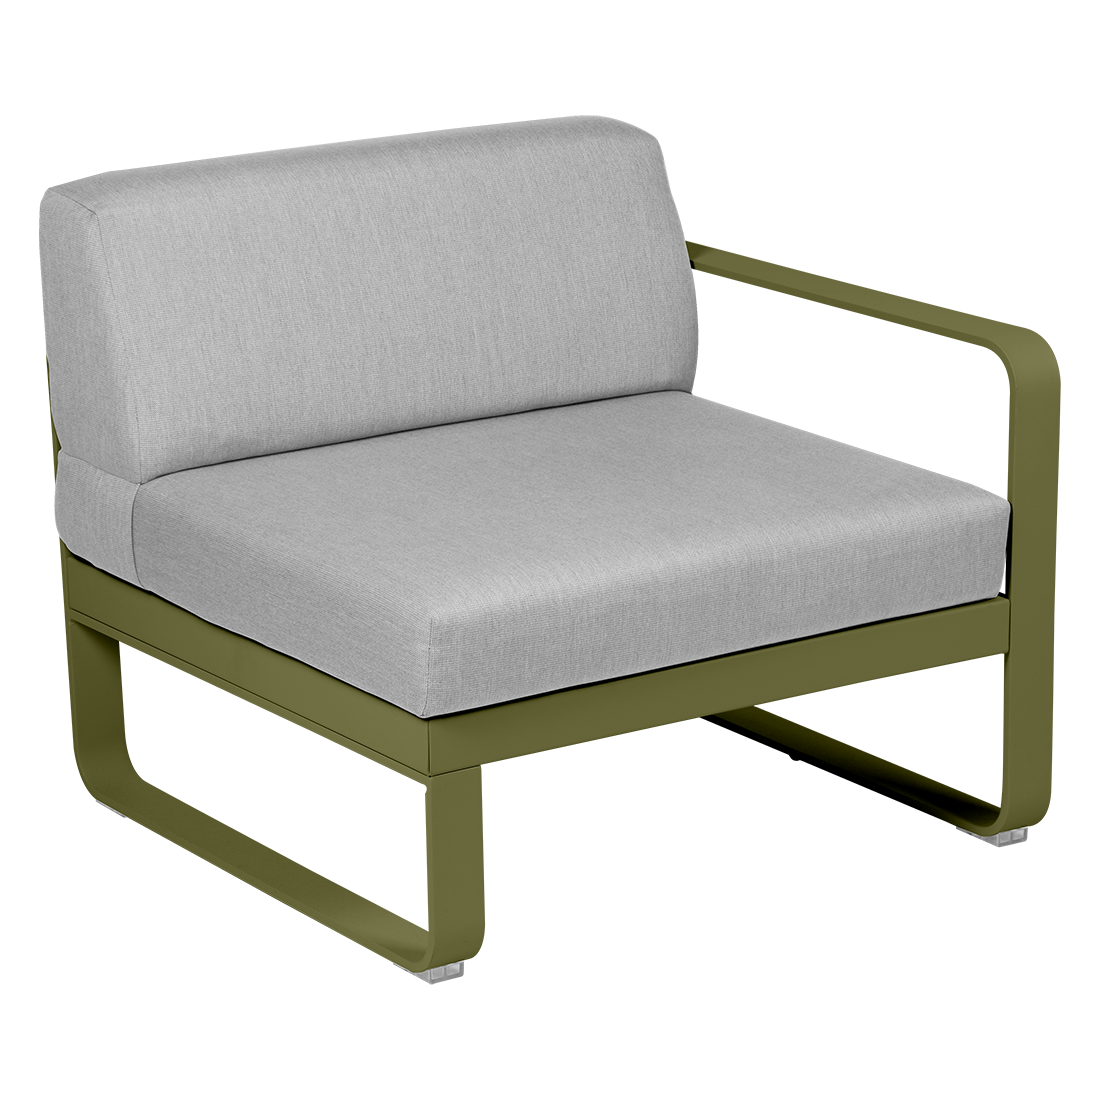 BELLEVIE-1-SEATER RIGHT MODULE - FLANNEL GREY CUSHION